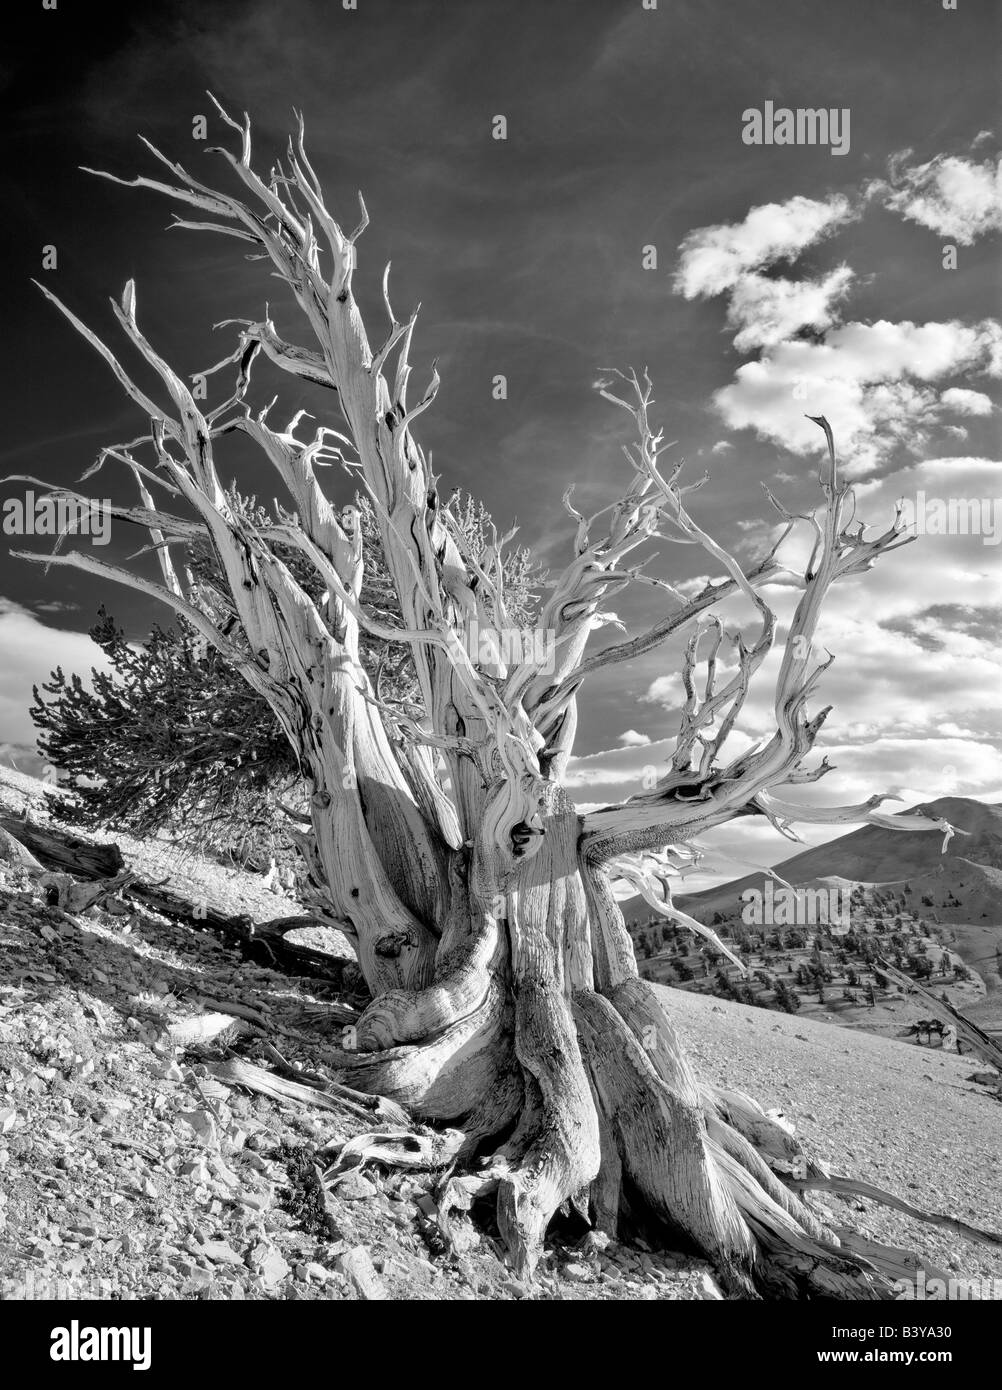 Widely branching Bristlecone Pine Ancient Bristlecone Pine Forest California Stock Photo